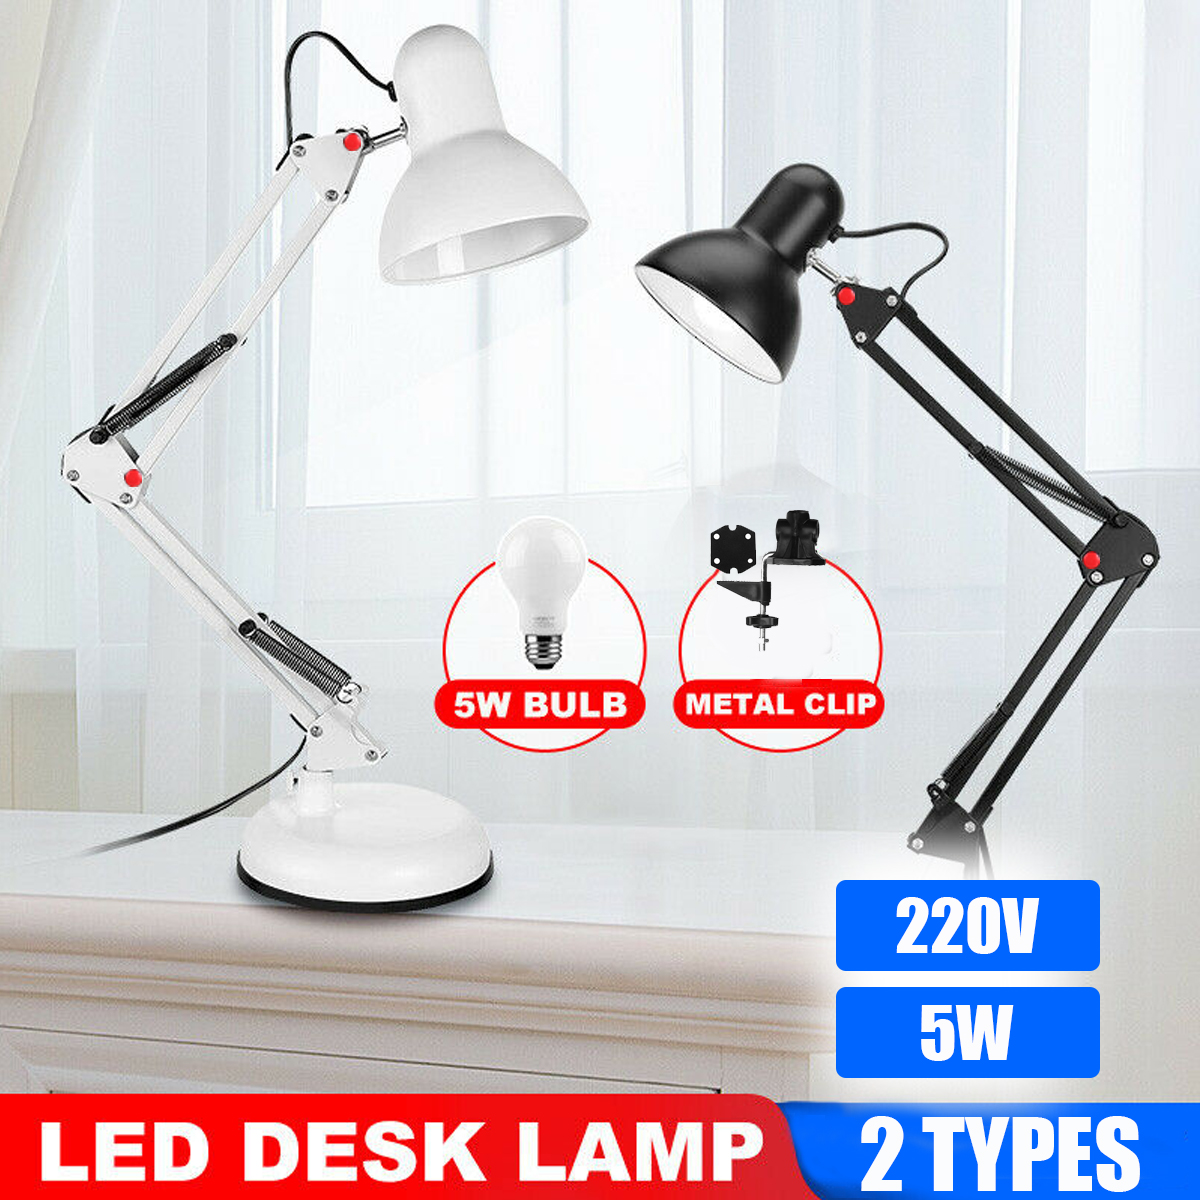 5W-Super-Bright-Swing-Arm-Desk-Lamp-Clamp-on-Table-Light-with-LED-Bulb-Metal-Clip-220V-1742397-2